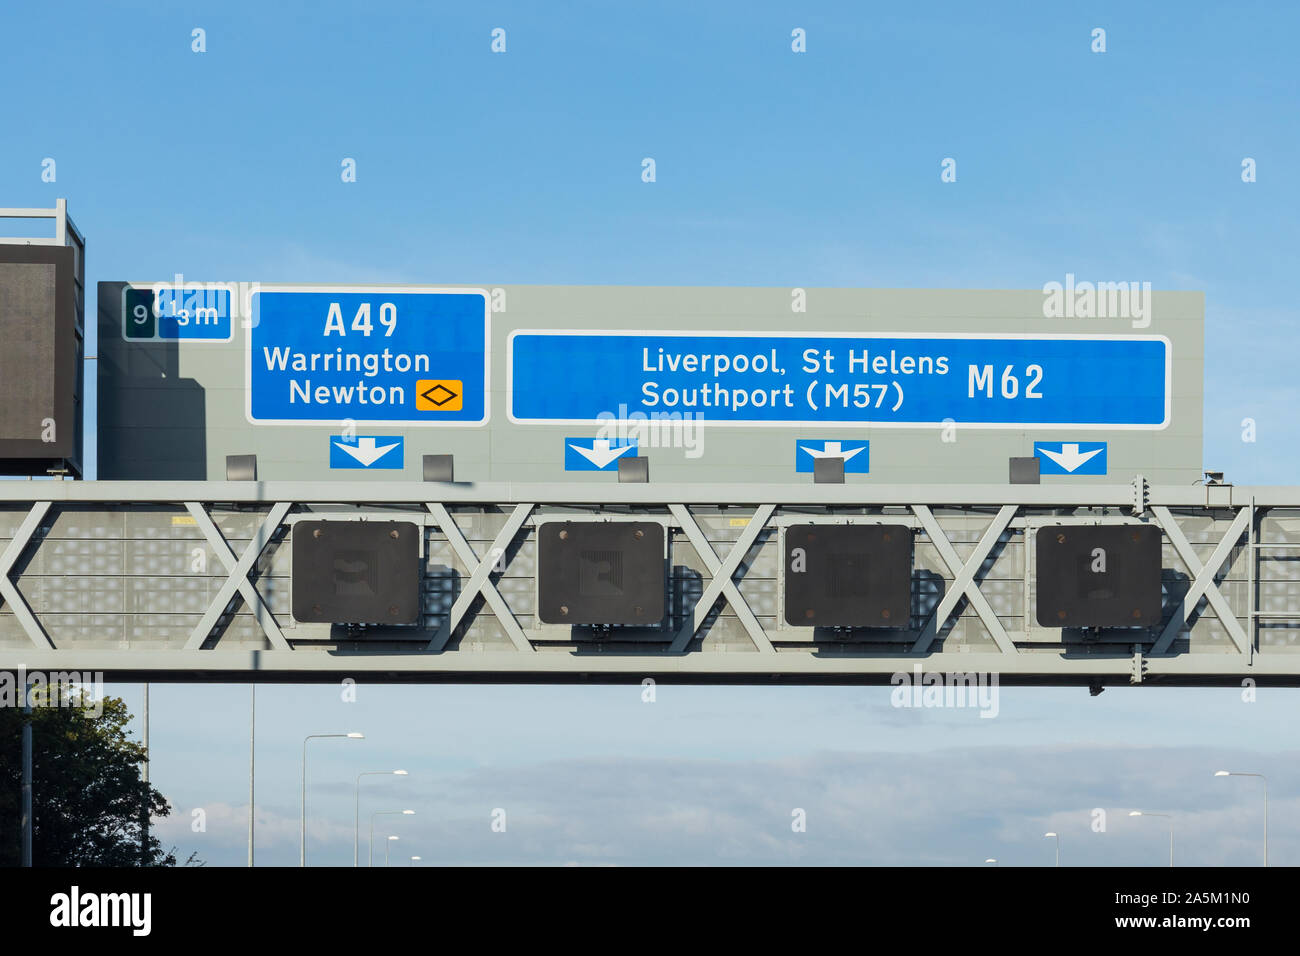 UK motorway sign showing directions to A49 Warrington, Newton and M62 Liverpool, St Helens, Southport (M57) Stock Photo